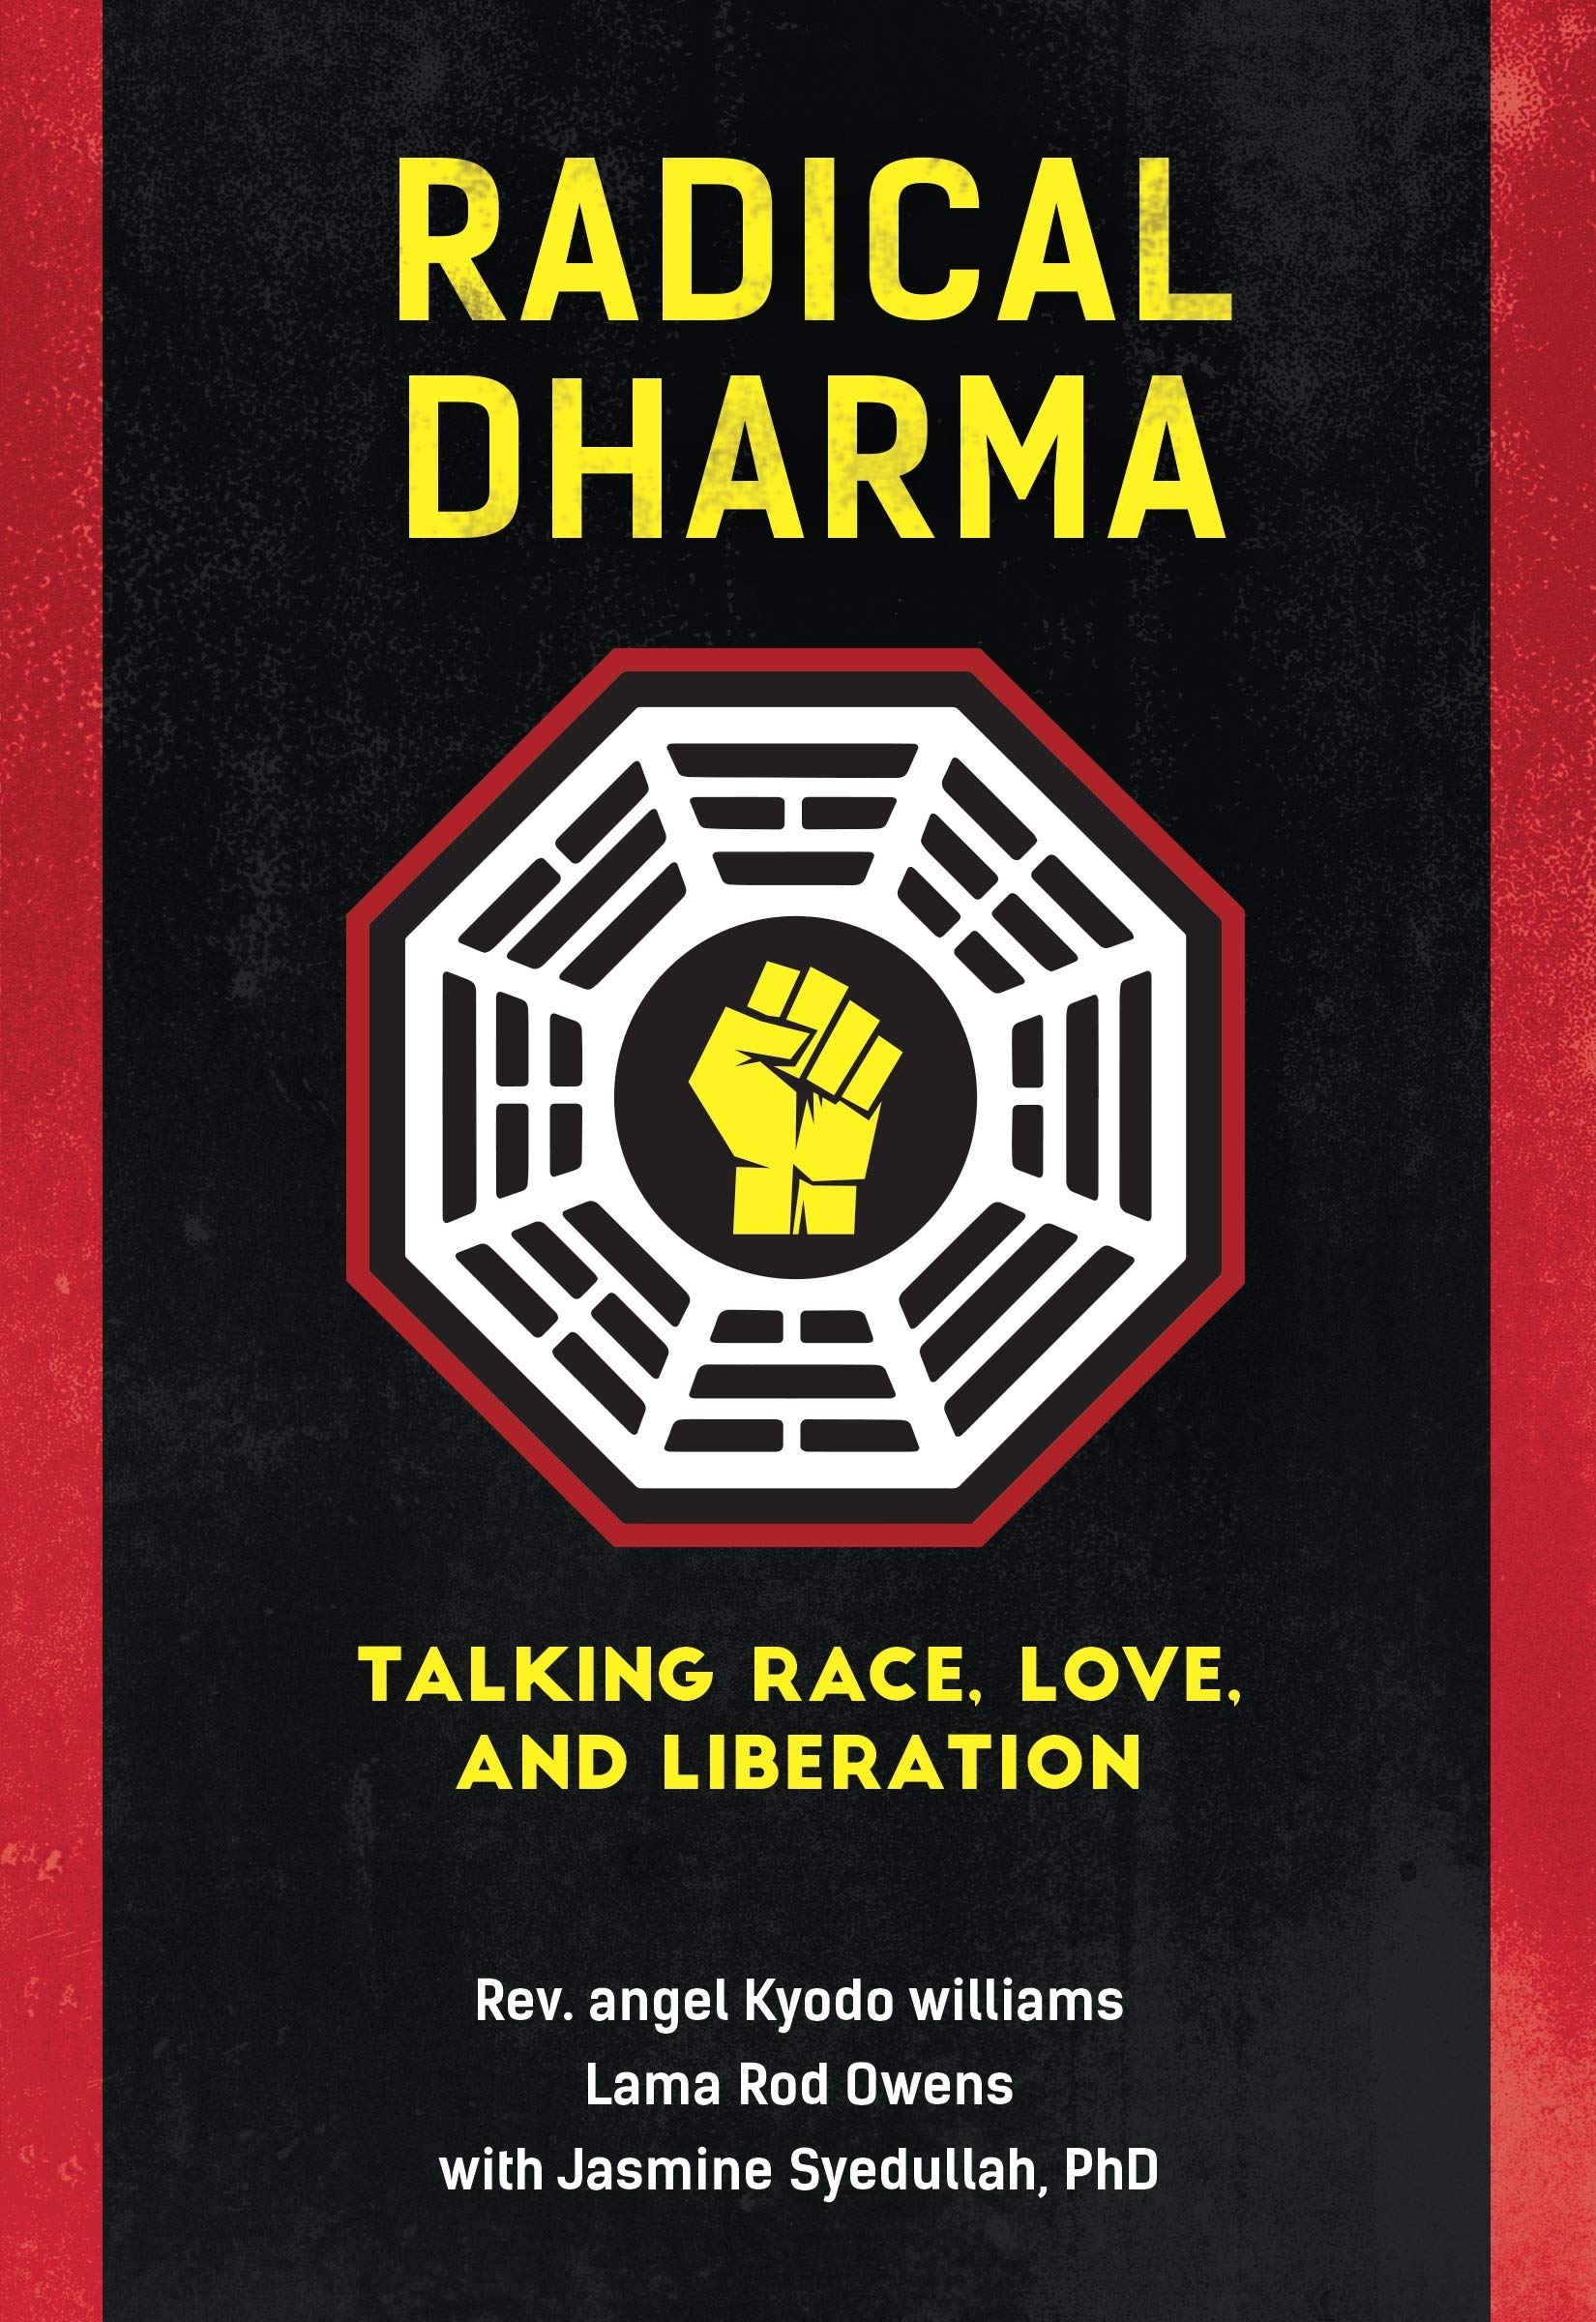 Image of the cover of Radical Dharma: Talking Race, Love, and Liberation (North Atlantic Books, 2016) by Lama Rod Owens